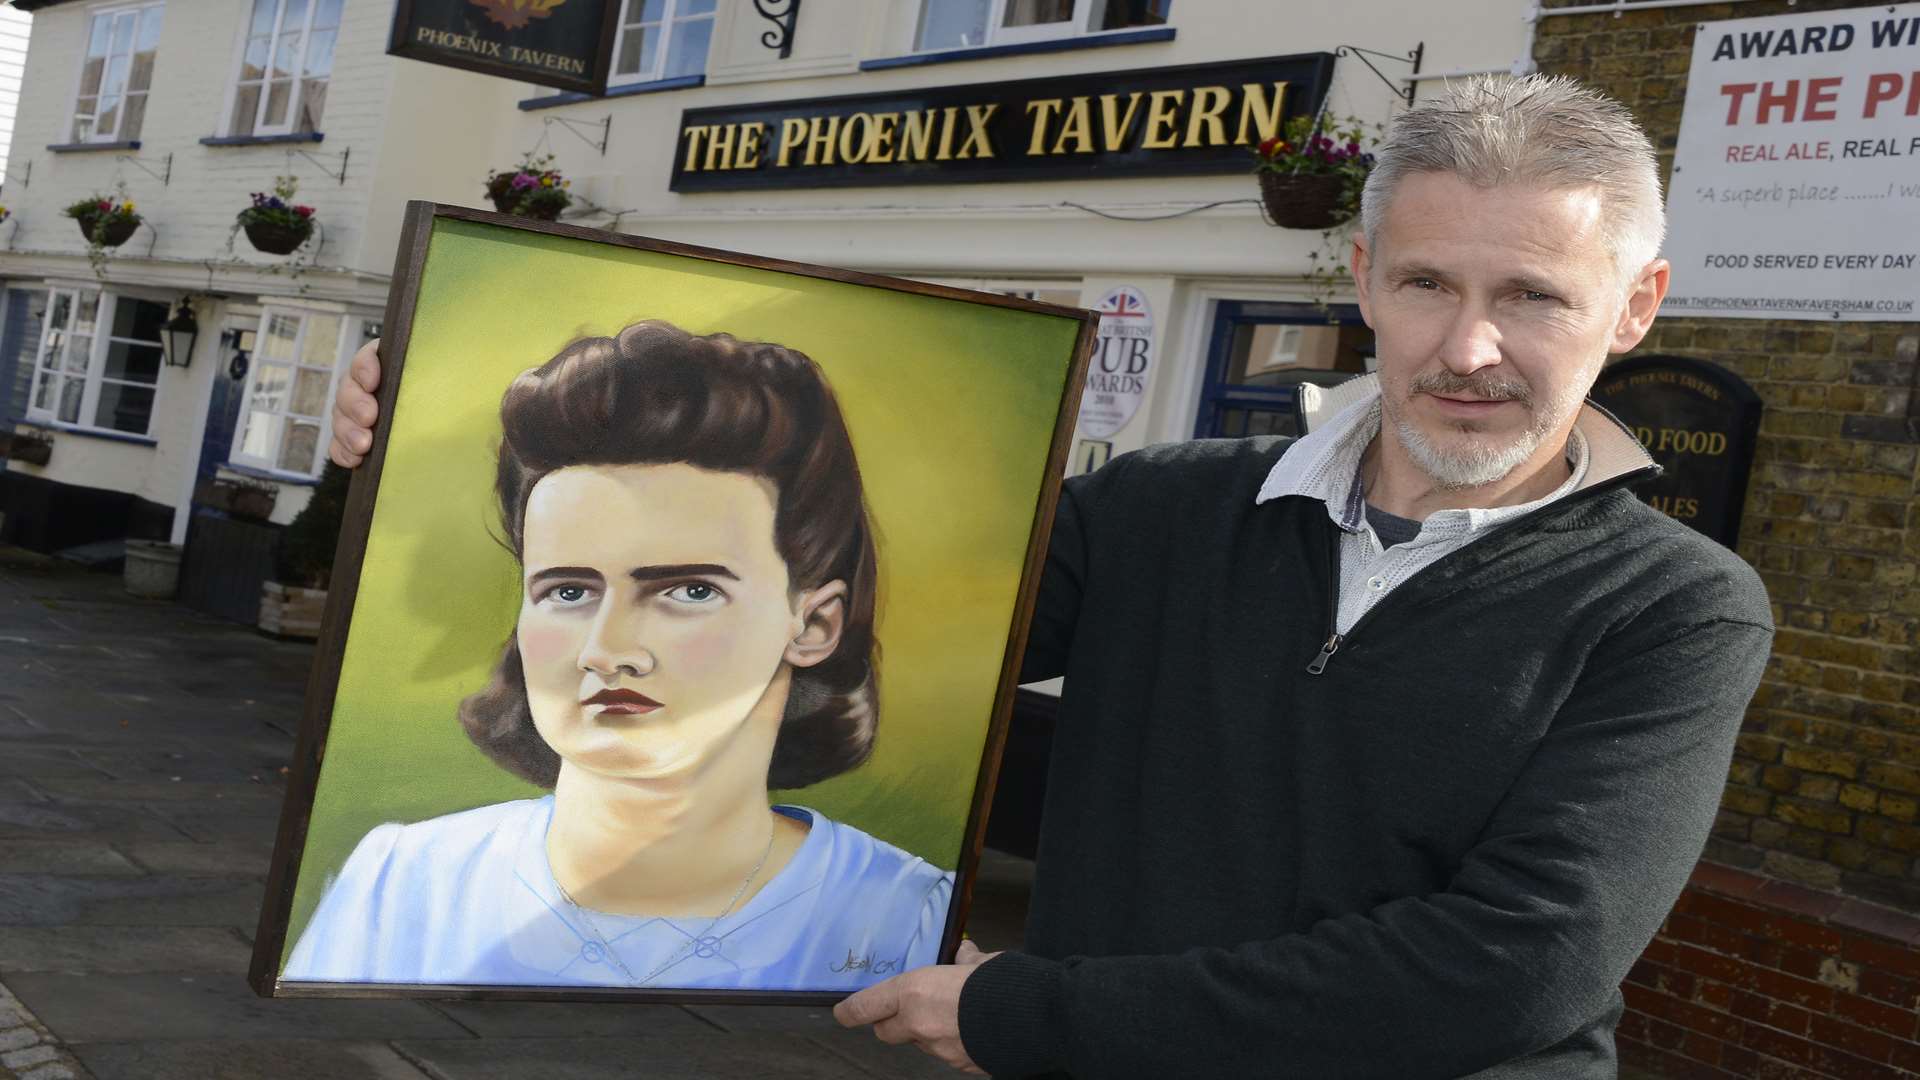 Jason Cox with his oil painting of the old photograph.